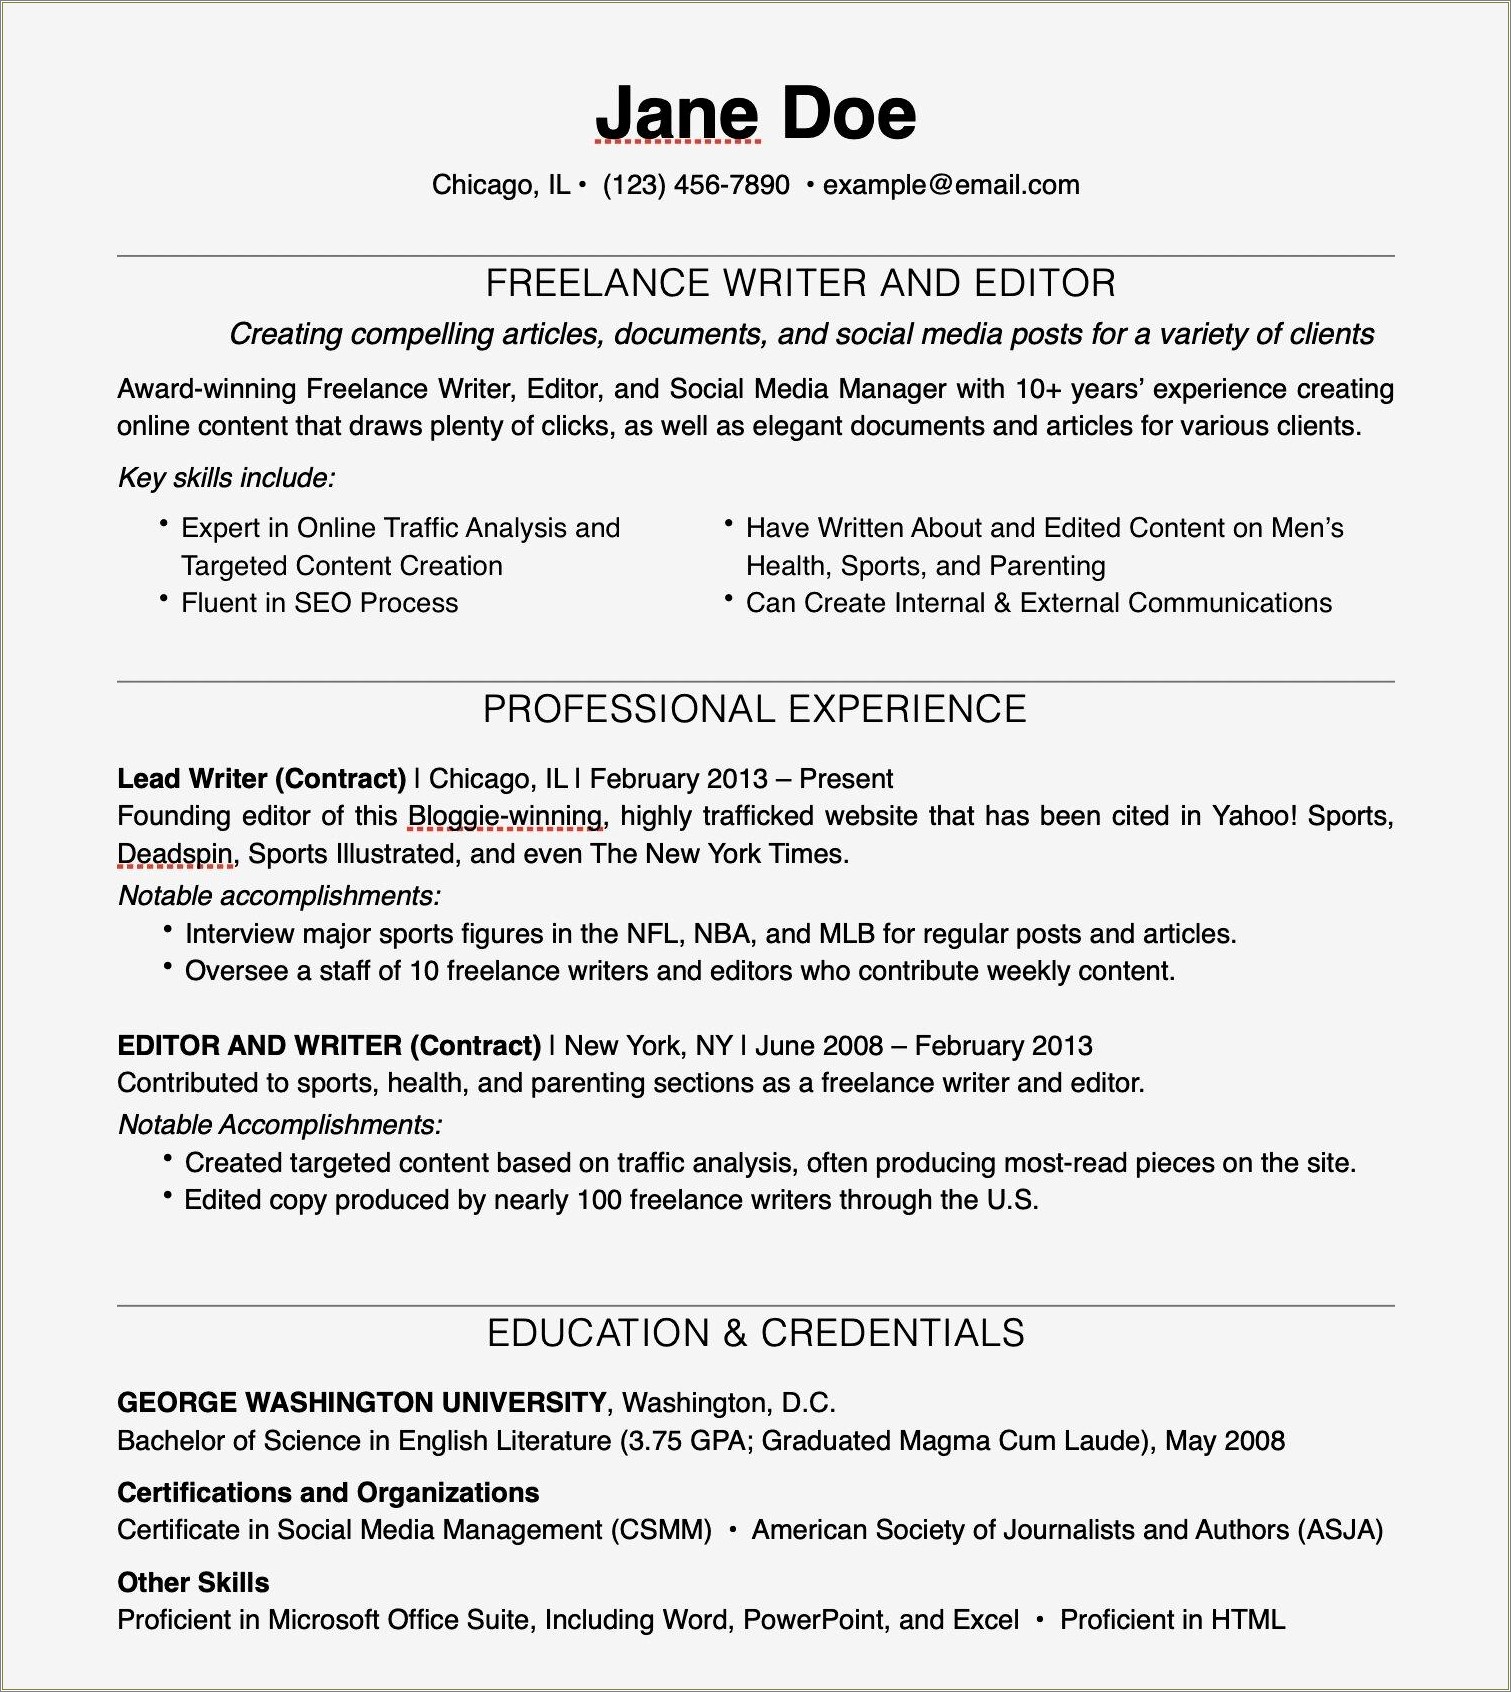 Referencing Part Time Consulting Work On Resume